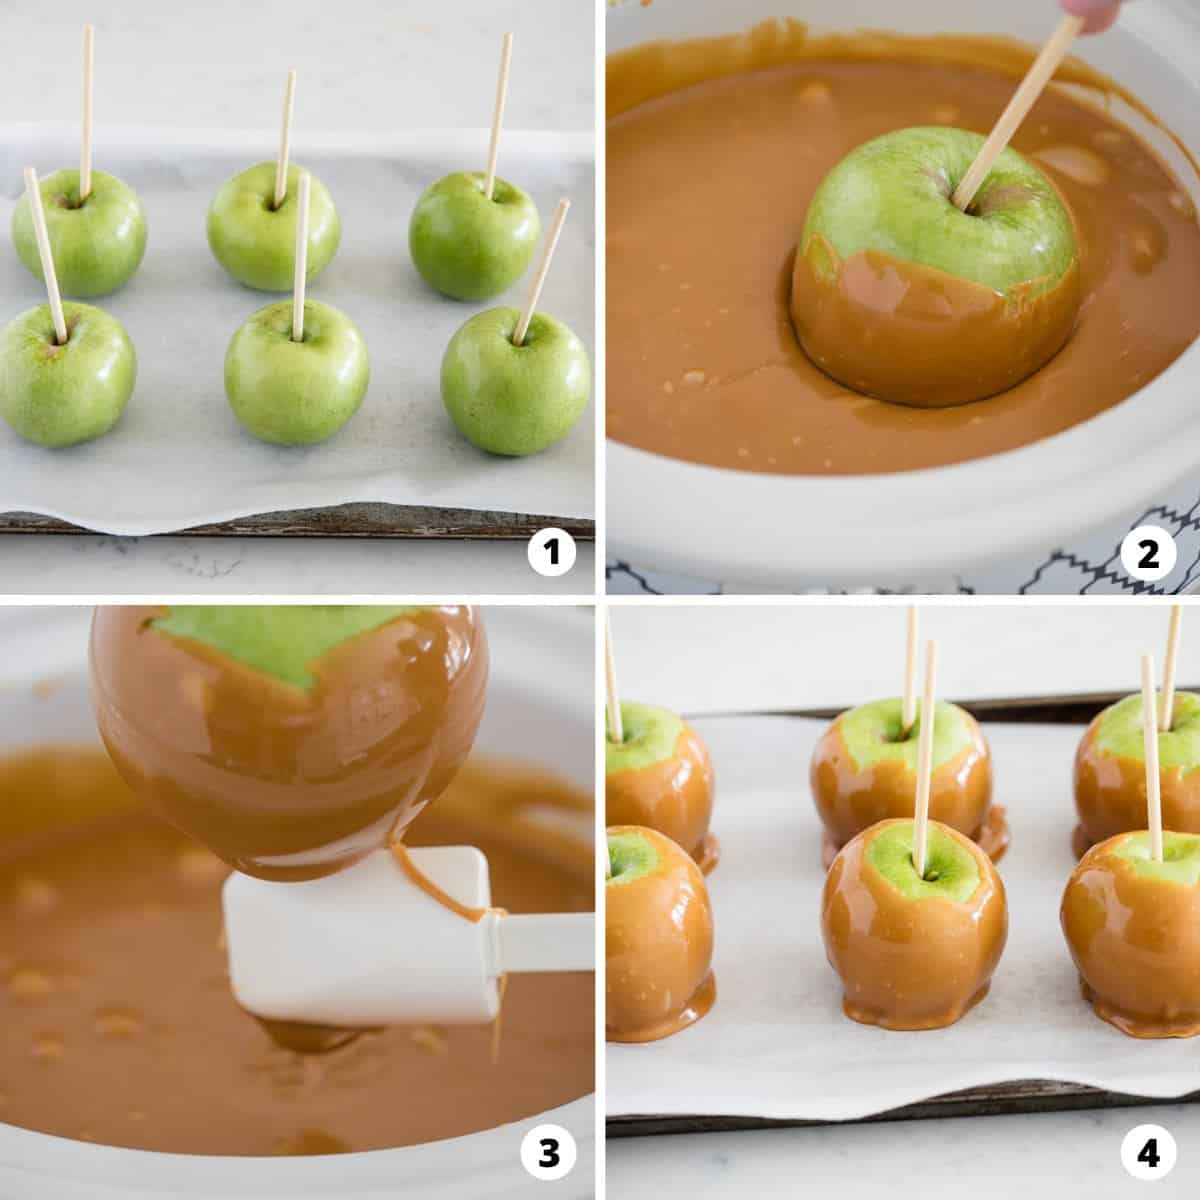 Showing how to make caramel apples in a 4 step collage.